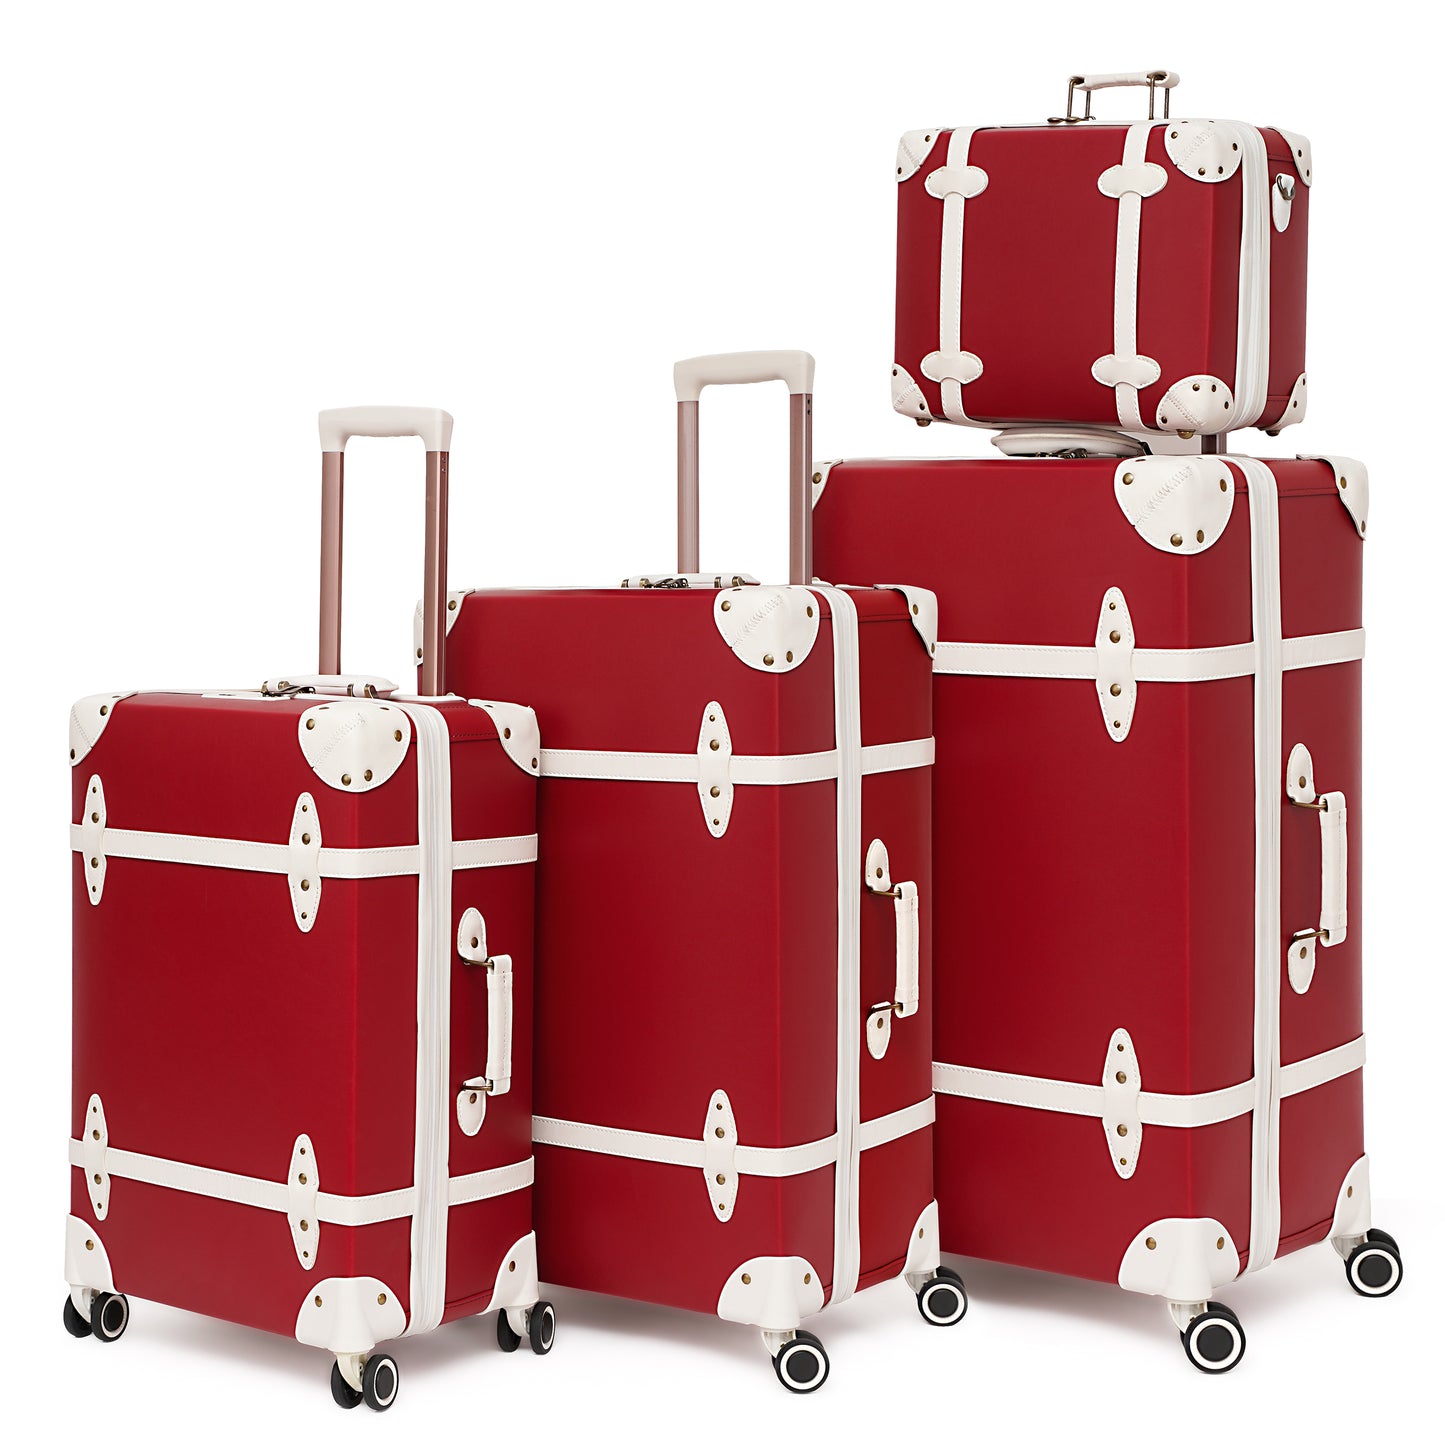 NZBZ Vintage Luggage Sets of 4 Pieces, Carry On Cute Suitcase with Rolling Spinner Wheels TSA Lock Luggage